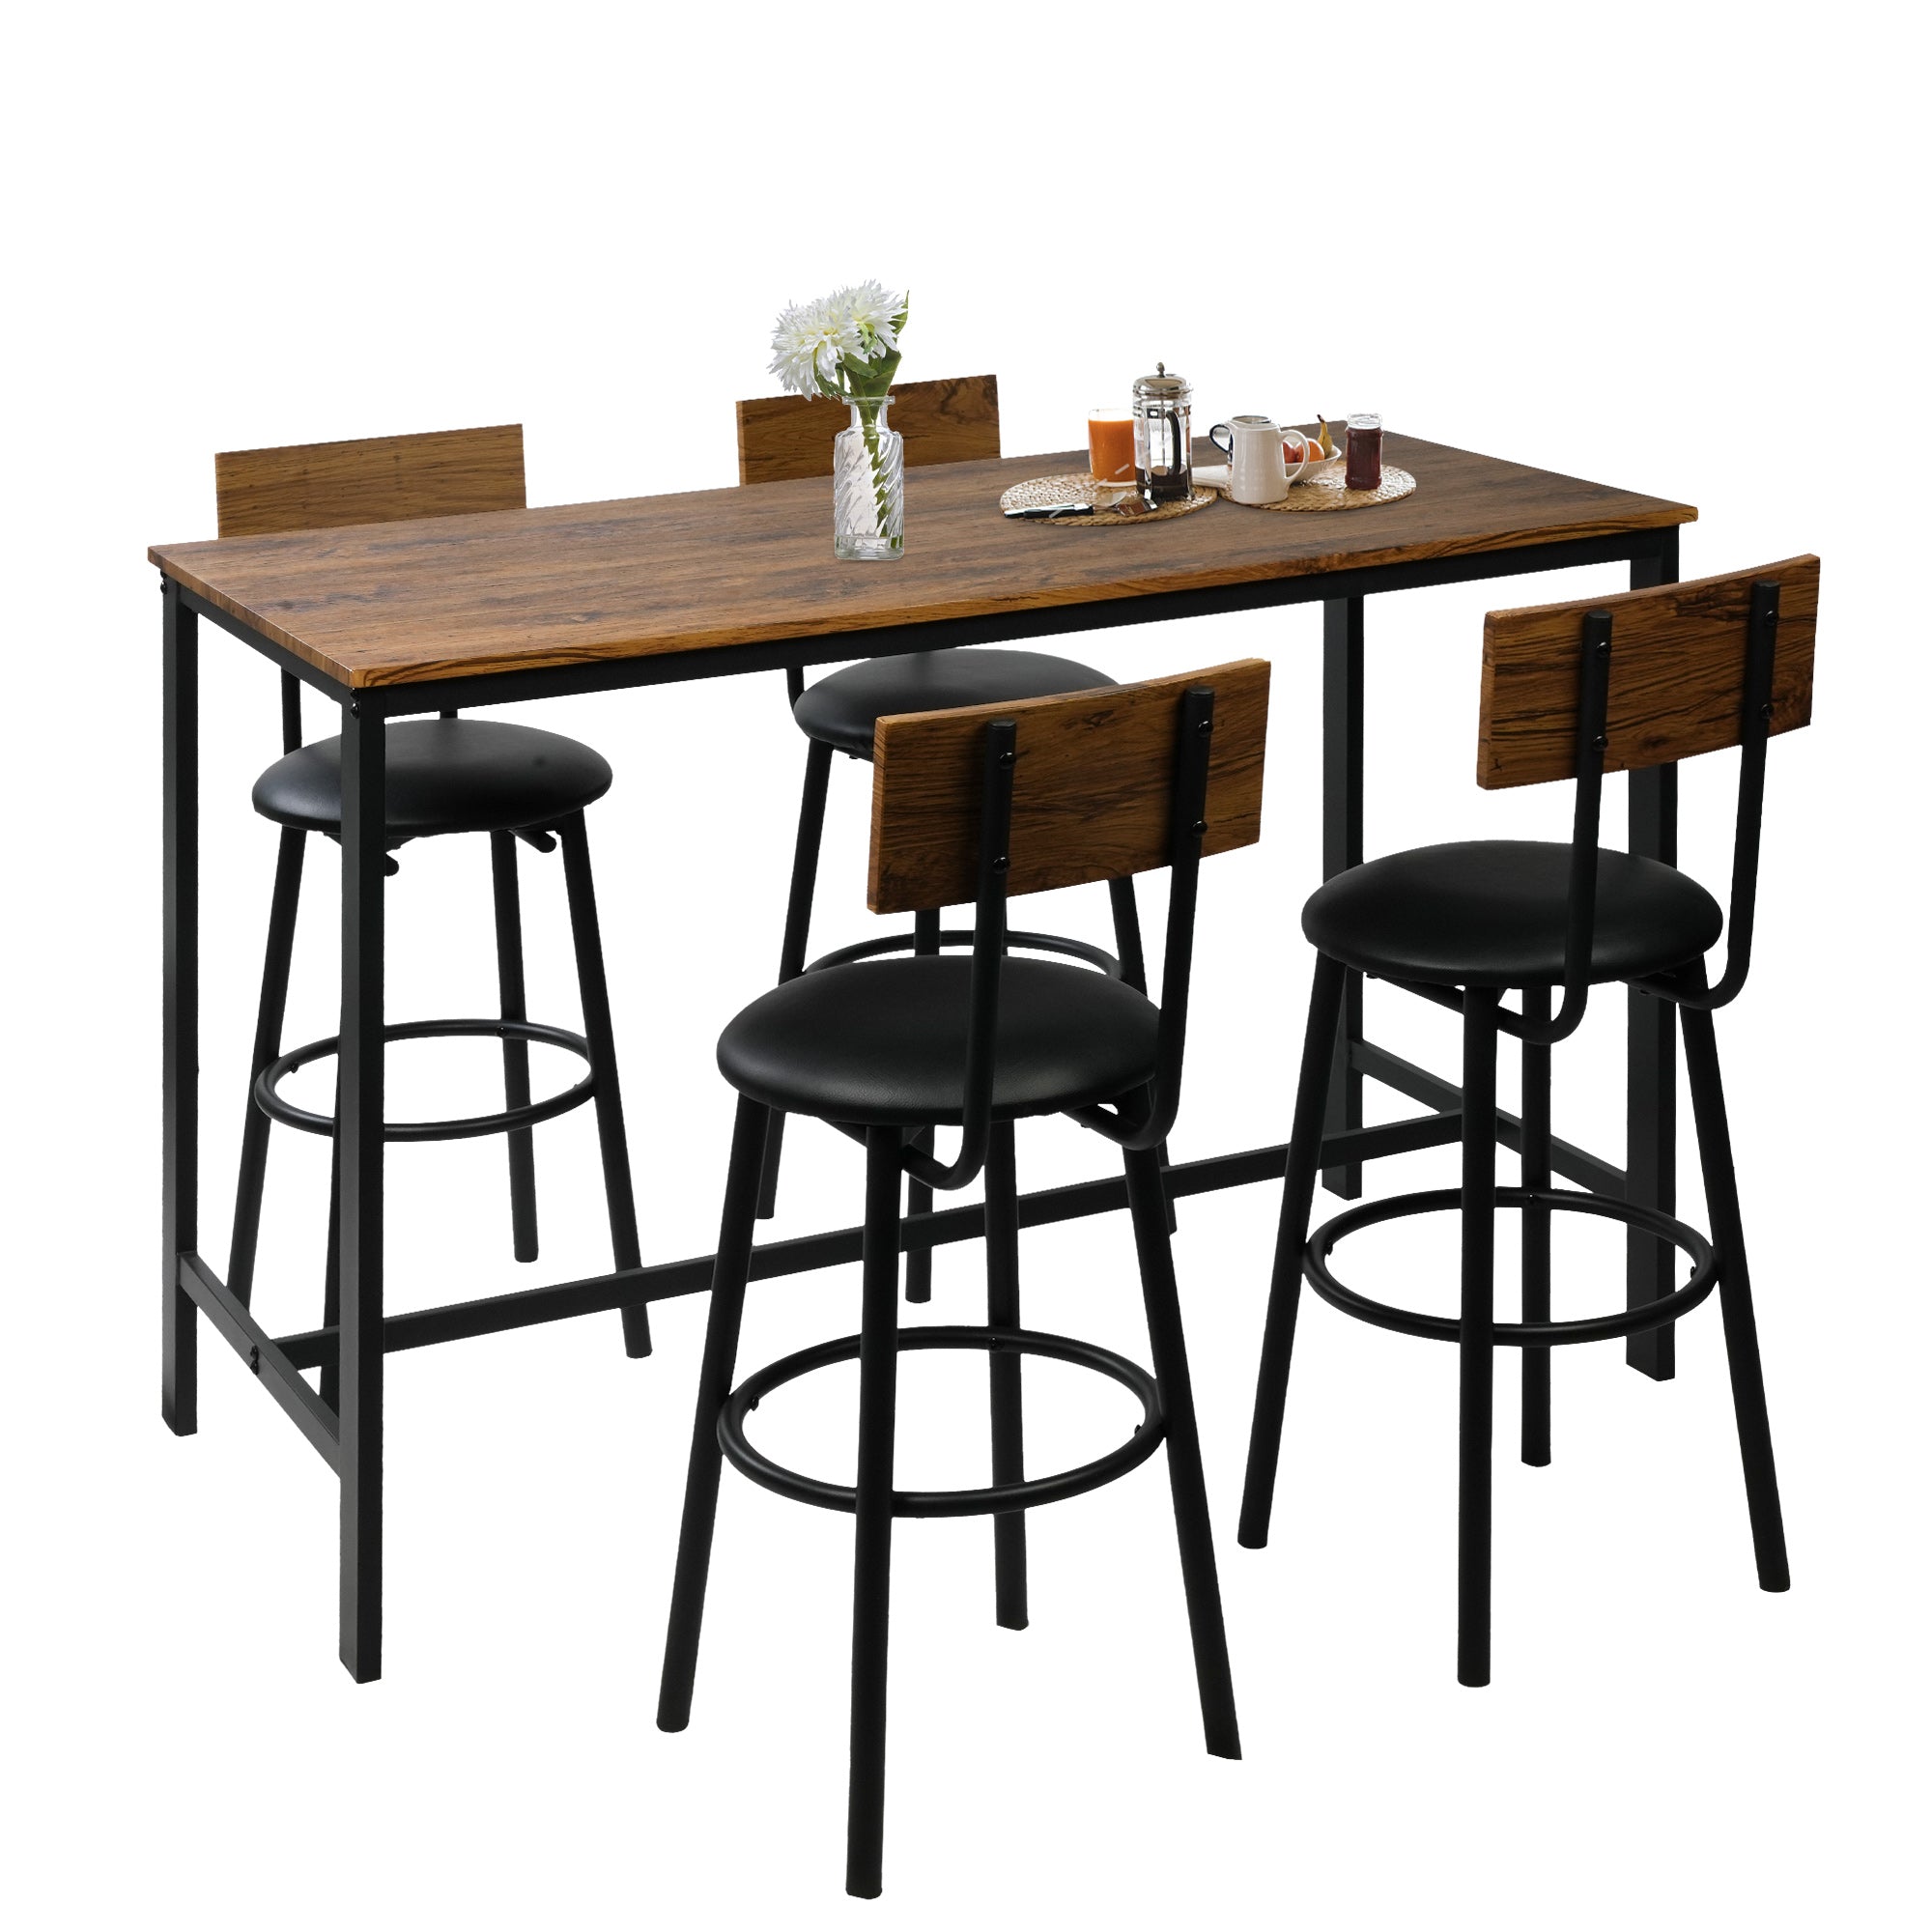 5 Piece Dining Bar Table Set with 4 Upholstered Bar Stools, Mid Century Pub Stool Dining Table for 4, Rustic Brown